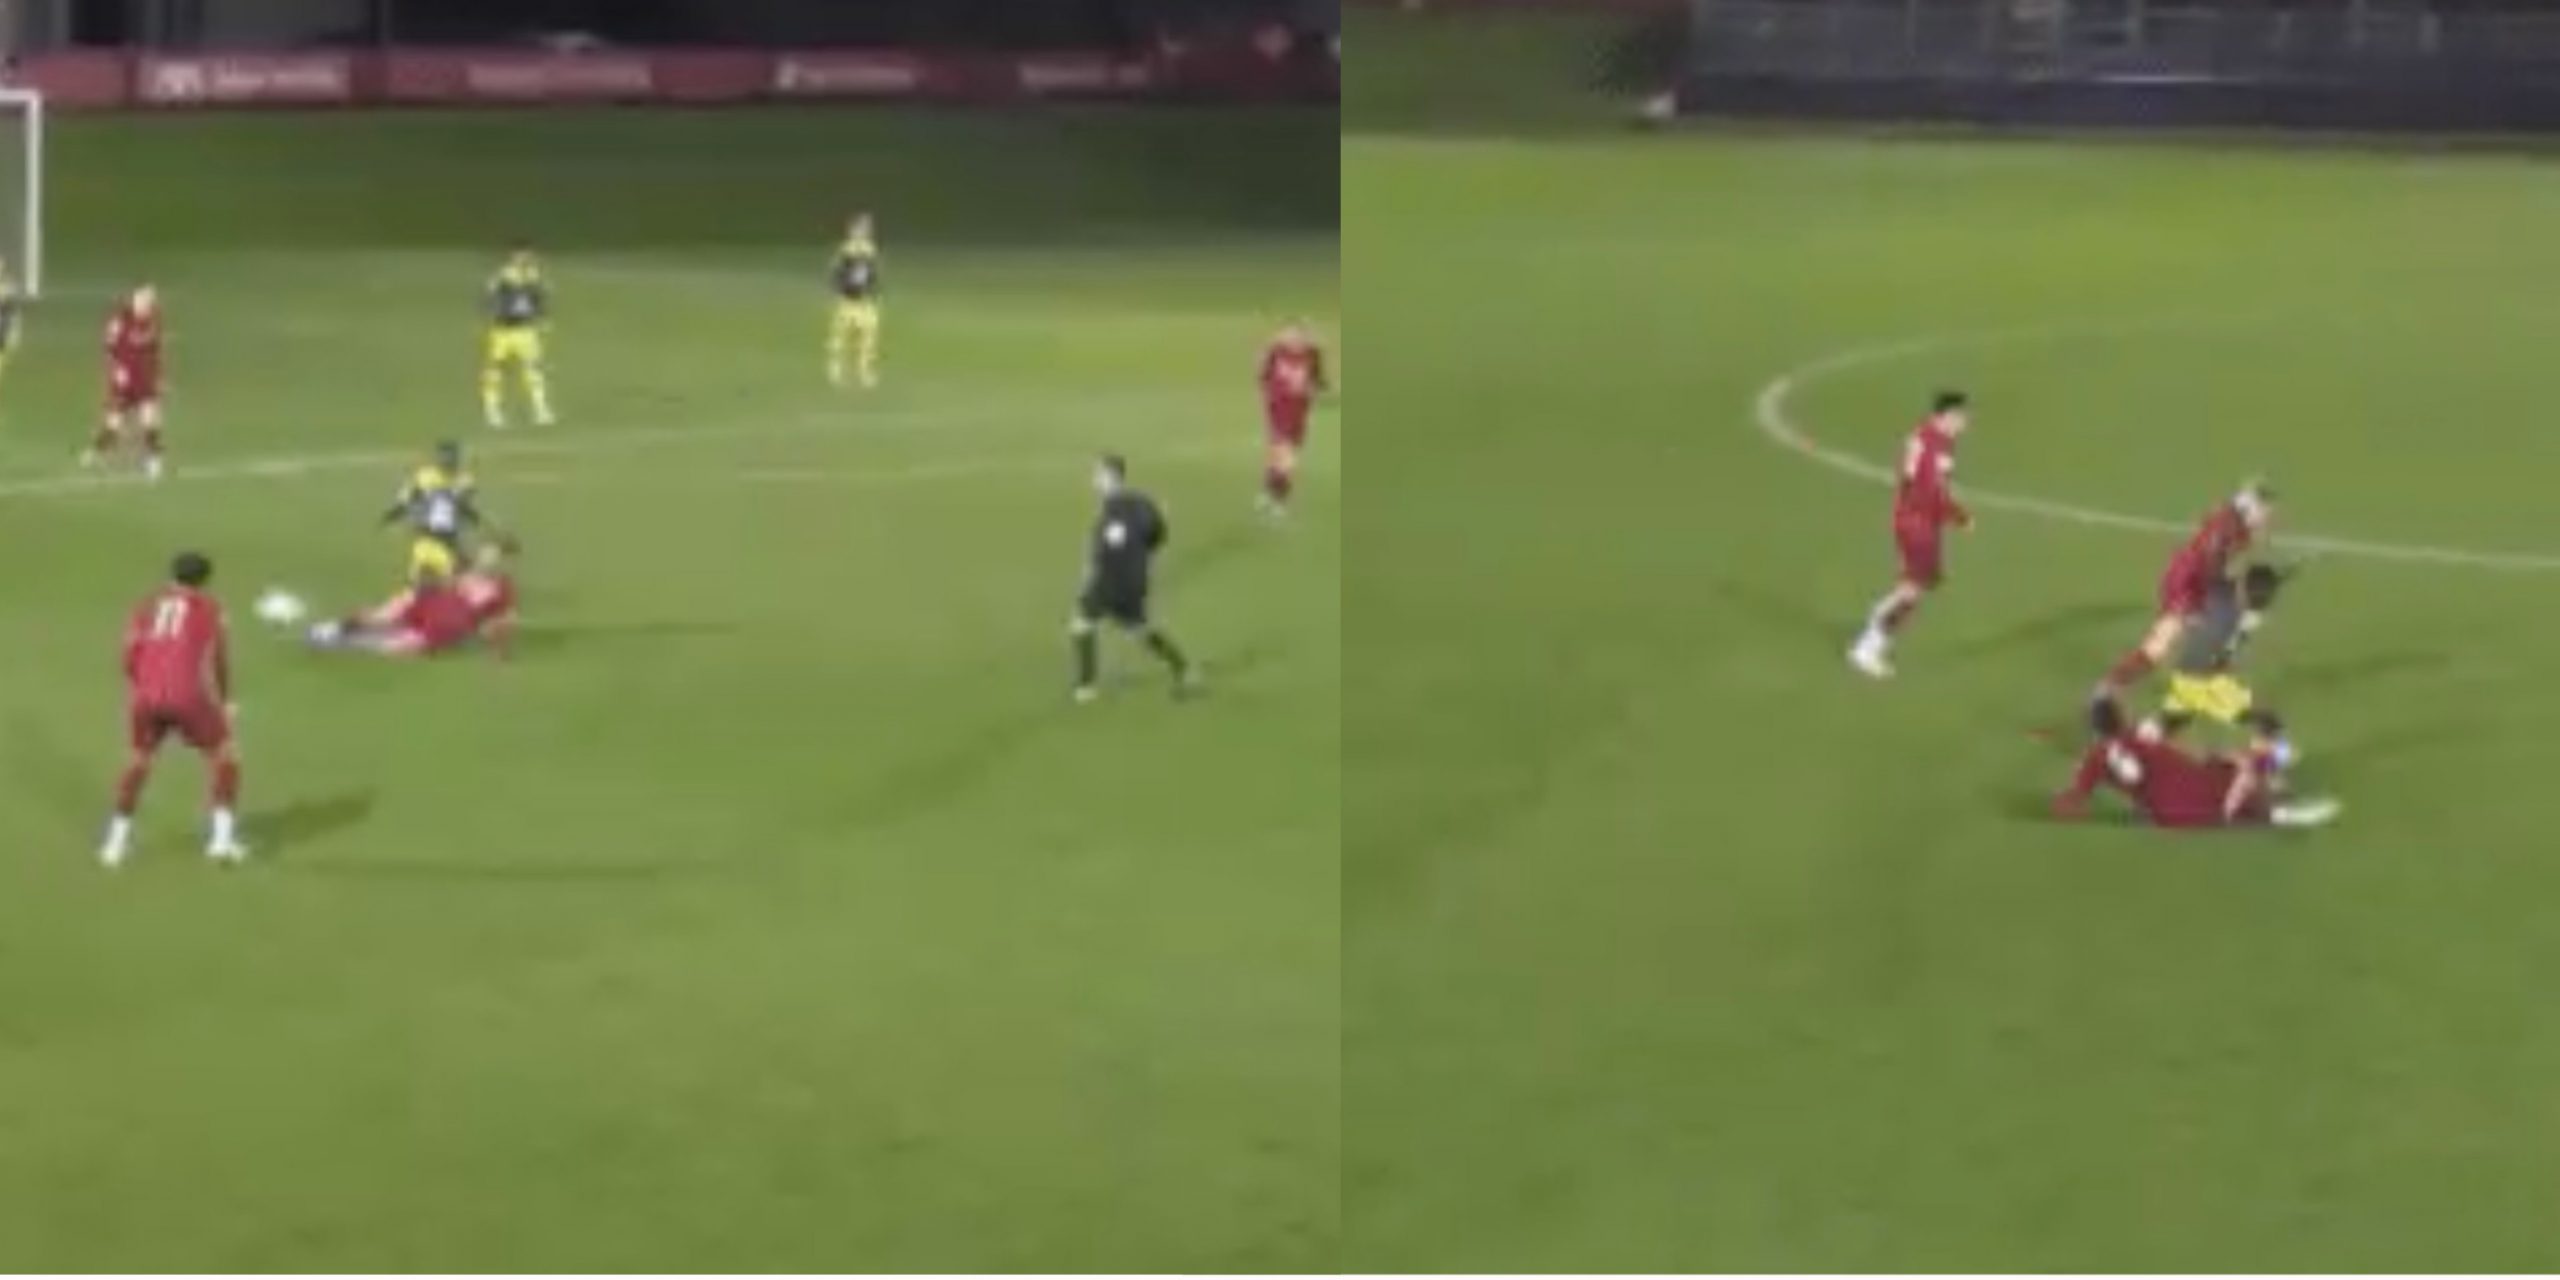 🔥 Klopp influence on display as Liverpool player spotted chasing the ball like a man possessed during an U23 game